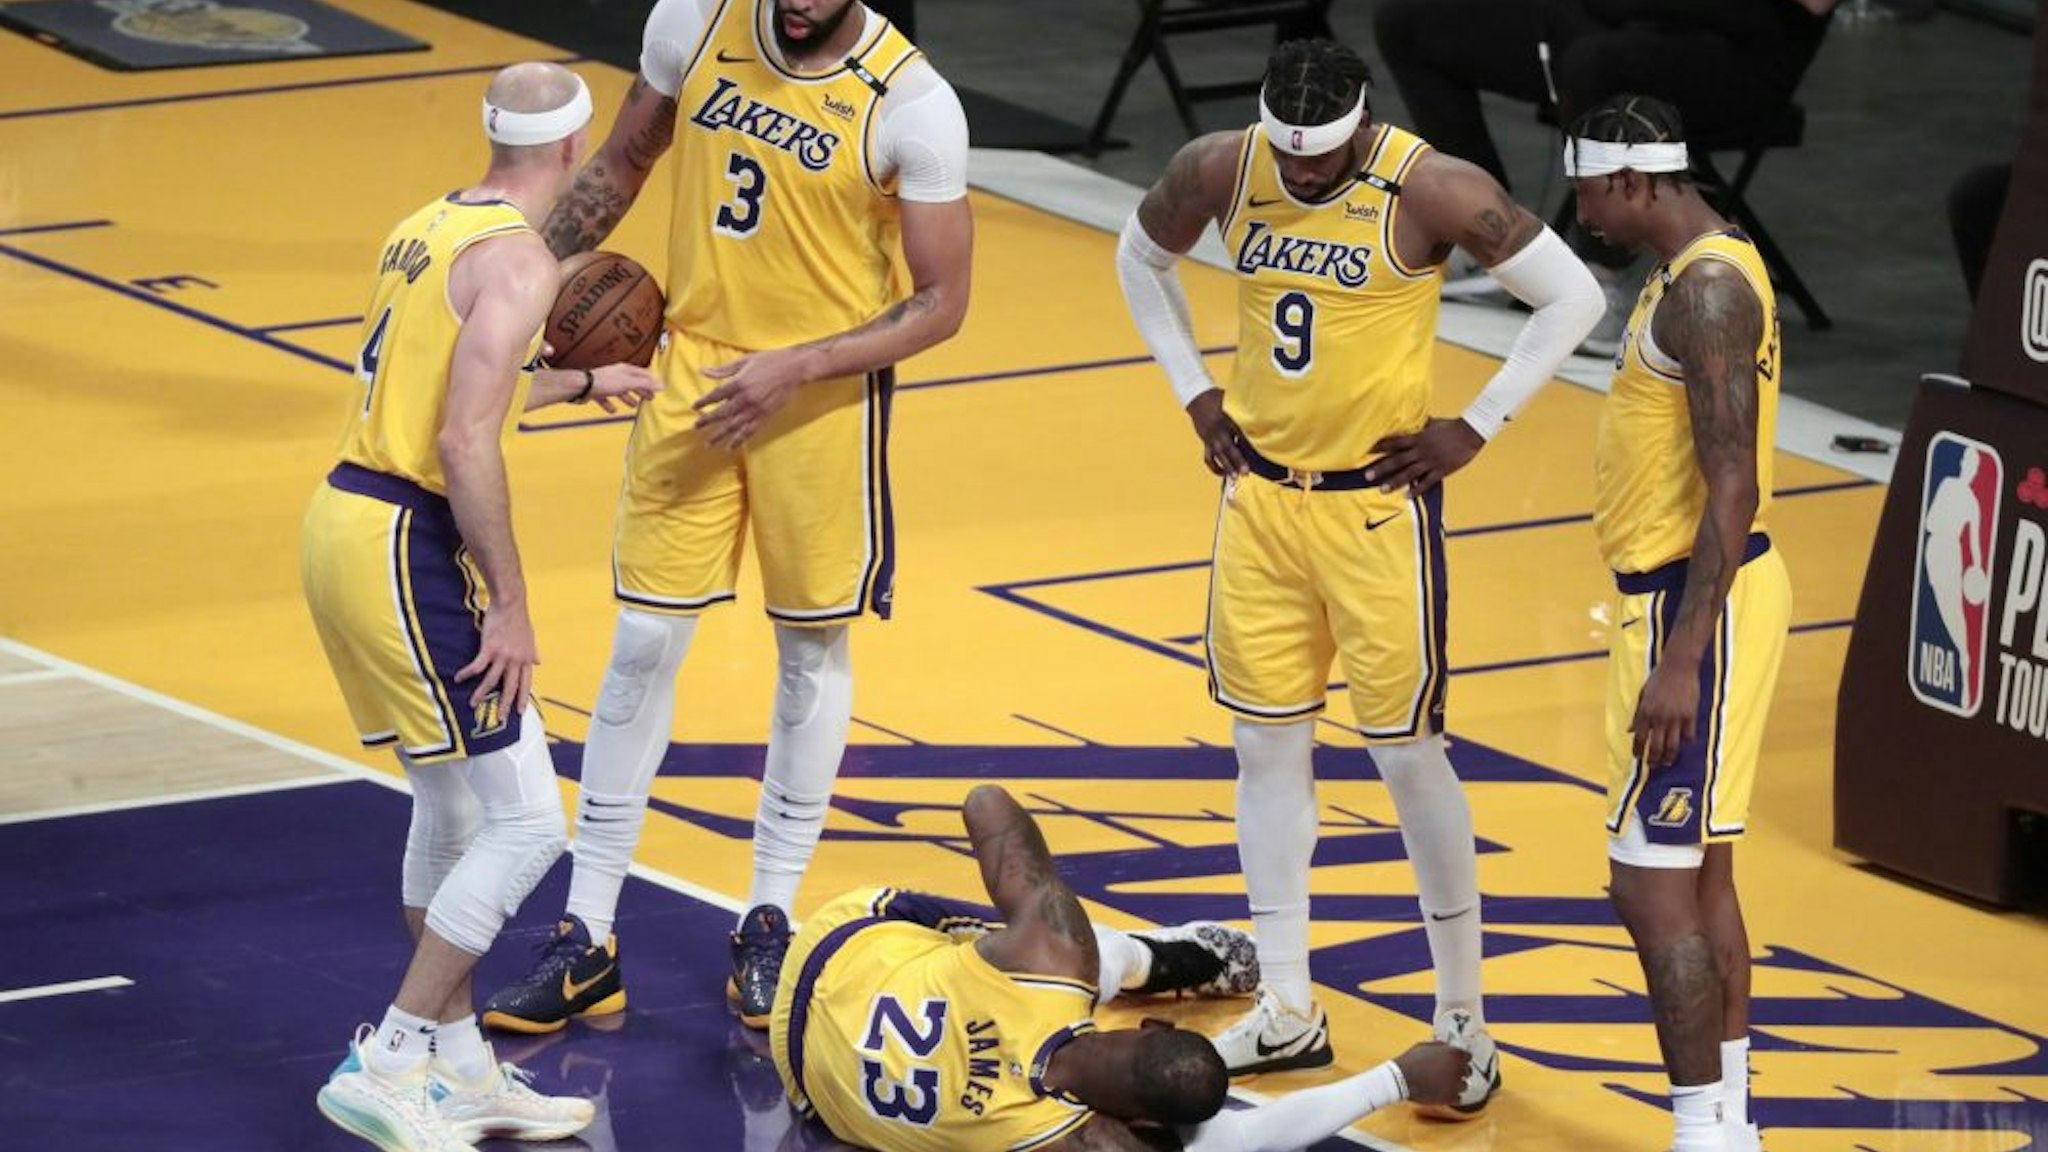 Los Angeles, CA, Wednesday, May 19, 2021 _ Teammates gather around Los Angeles Lakers forward LeBron James (23) as he lays stunned after taking a hard foul from Golden State Warriors forward Draymond Green (23) in the second half of a Pay-In game at Staples Center.